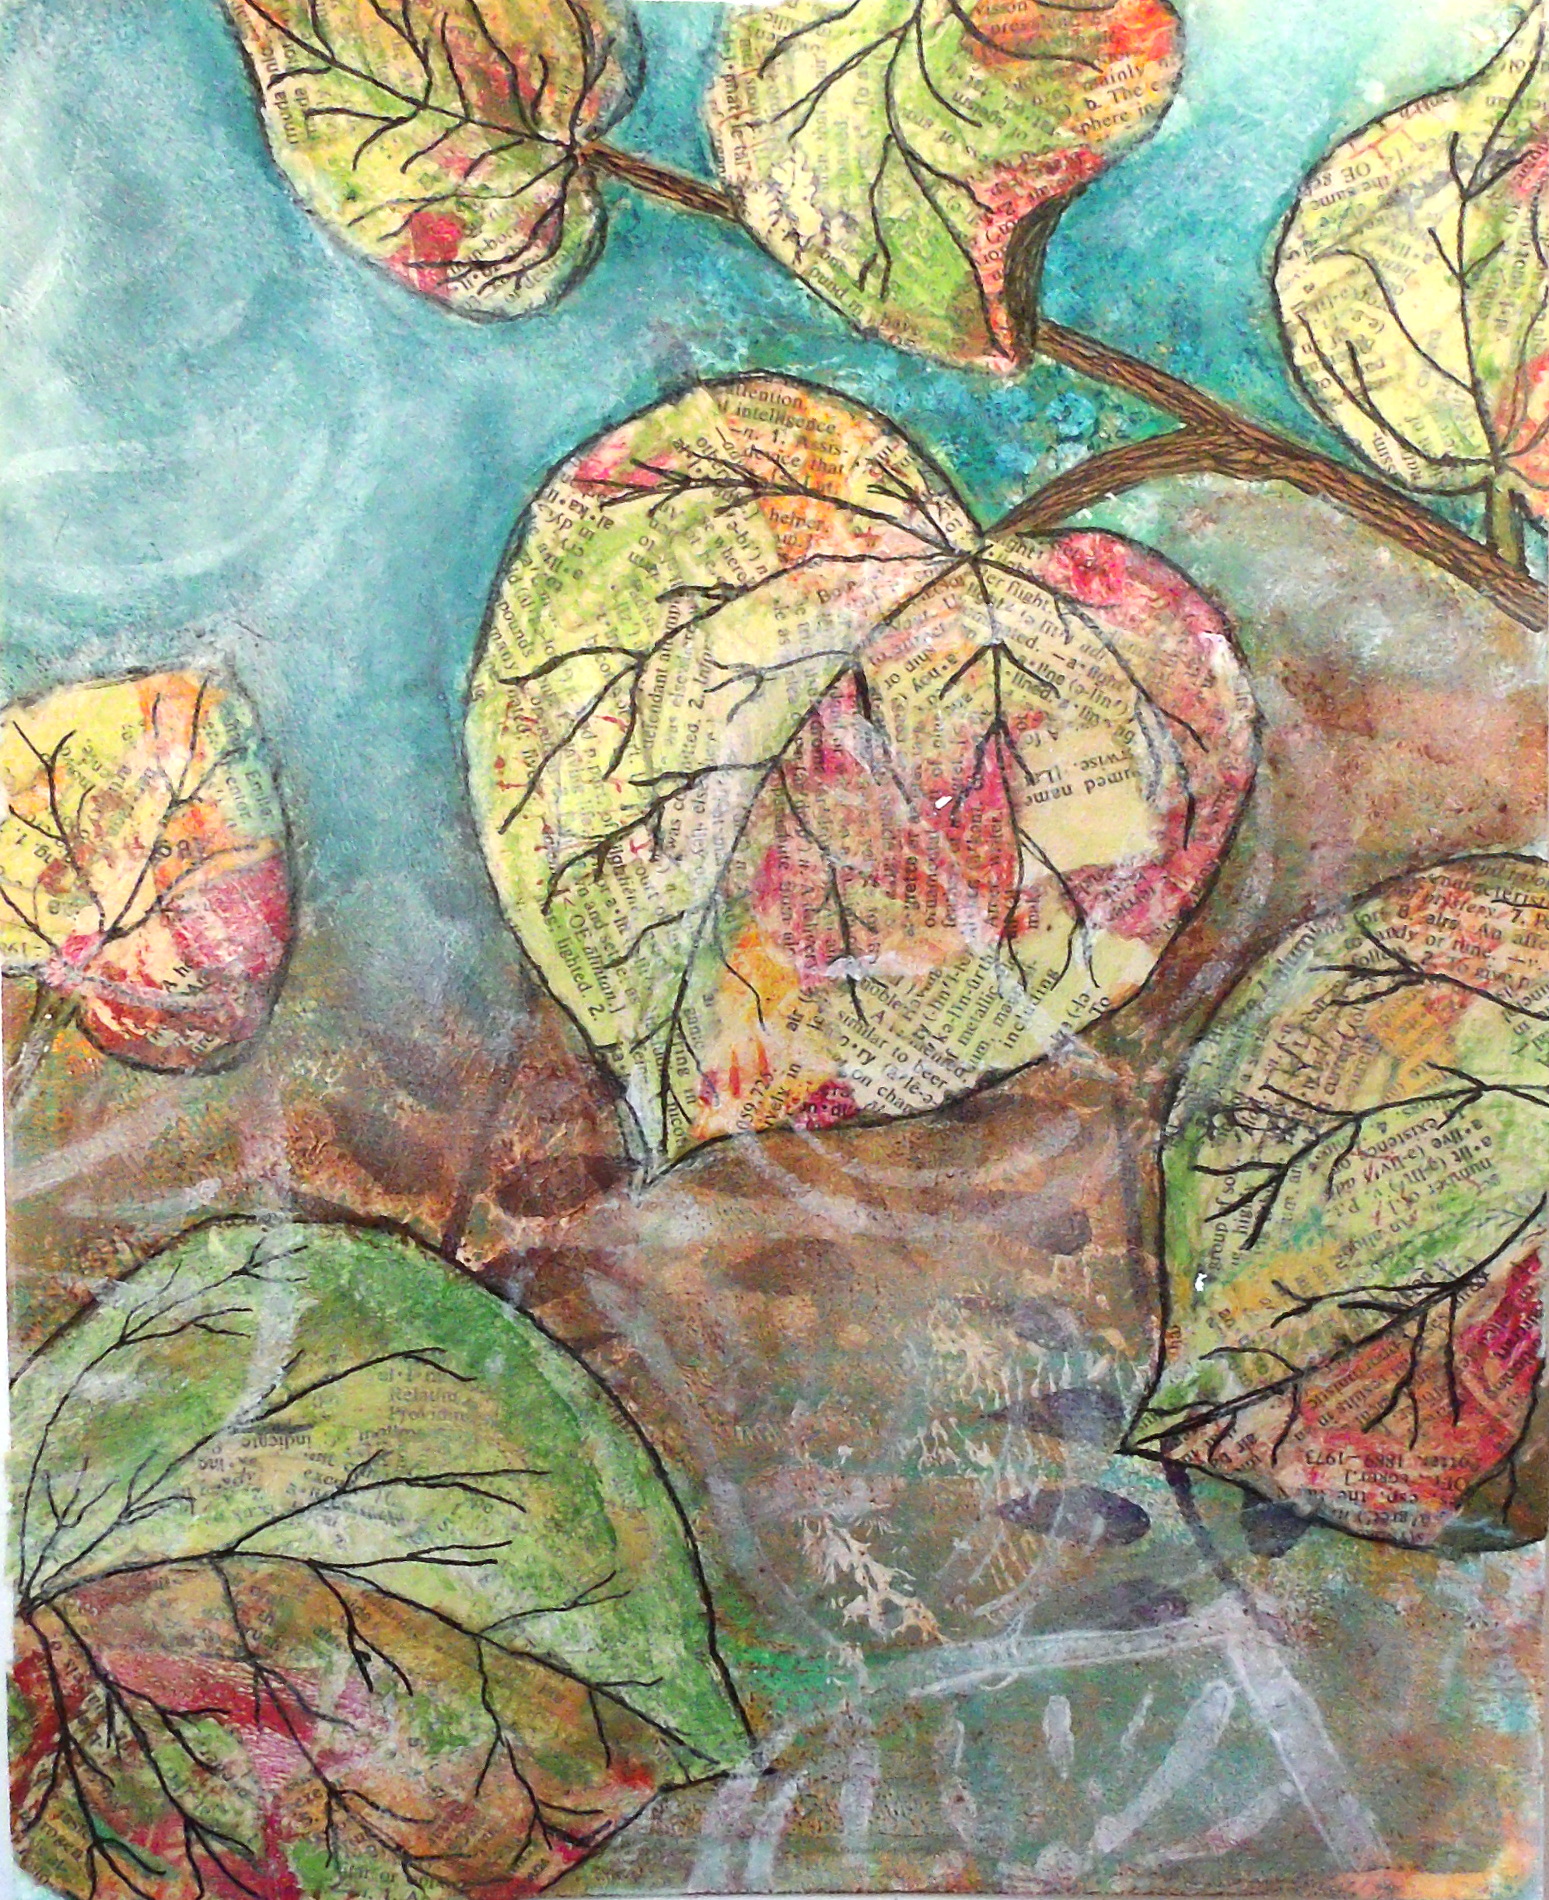 Torn paper collage - redbud leaves